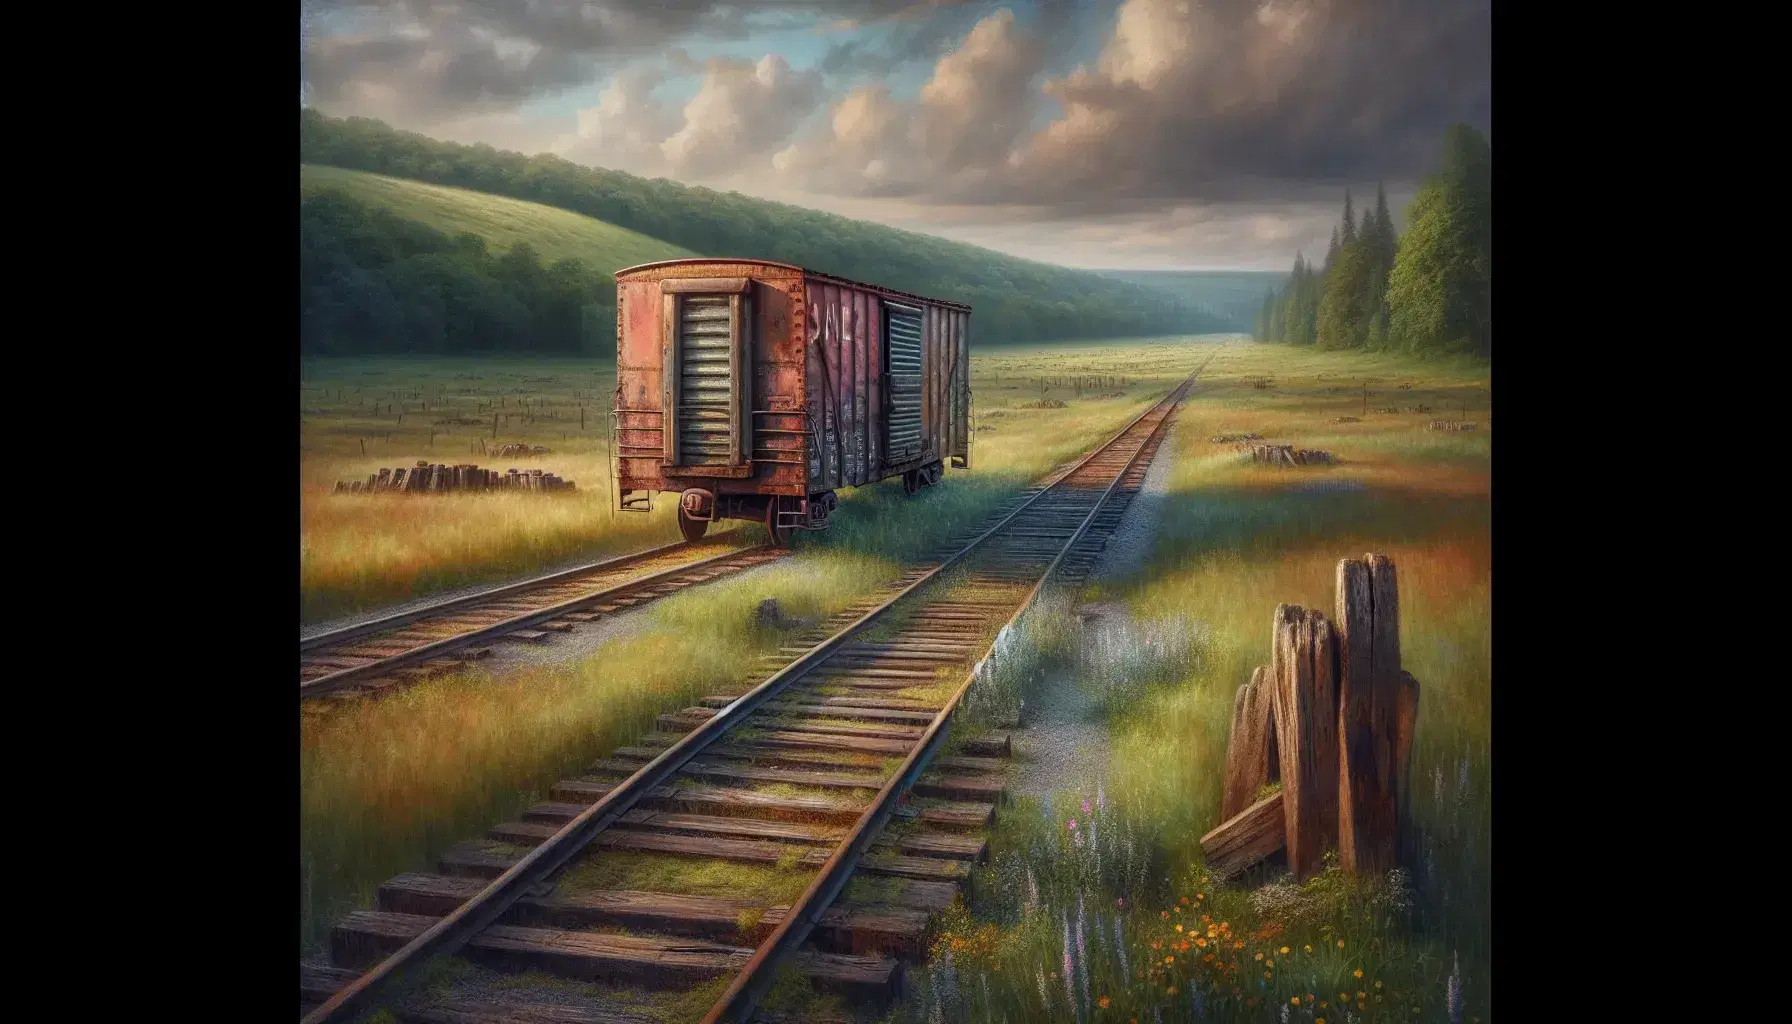 Weathered red boxcar with rust and peeling paint on old railroad tracks, surrounded by grass, wildflowers, and trees under a blue sky.